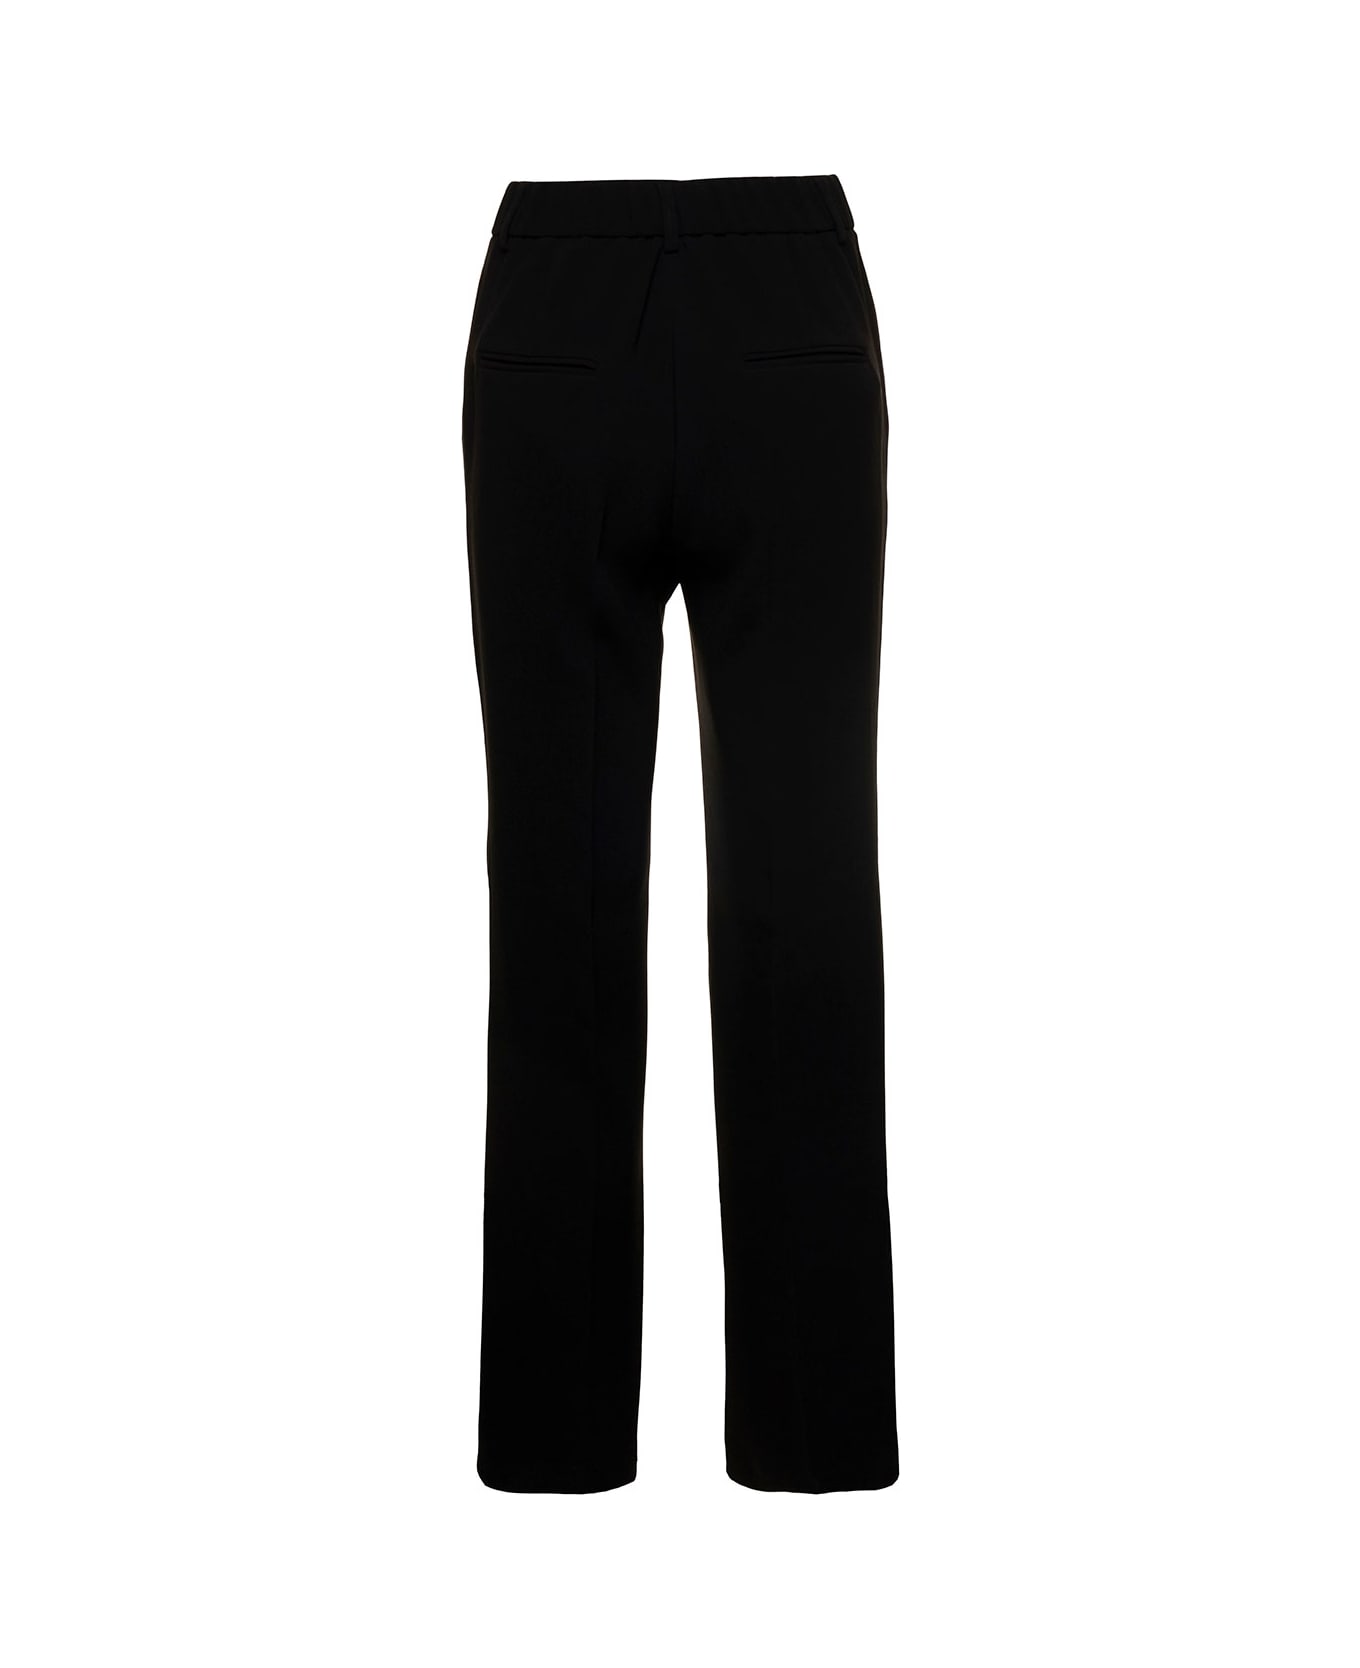 Alberto Biani Black Slightly Flared Pants With Concealed Fastening In Stretch Fabric Woman - Black